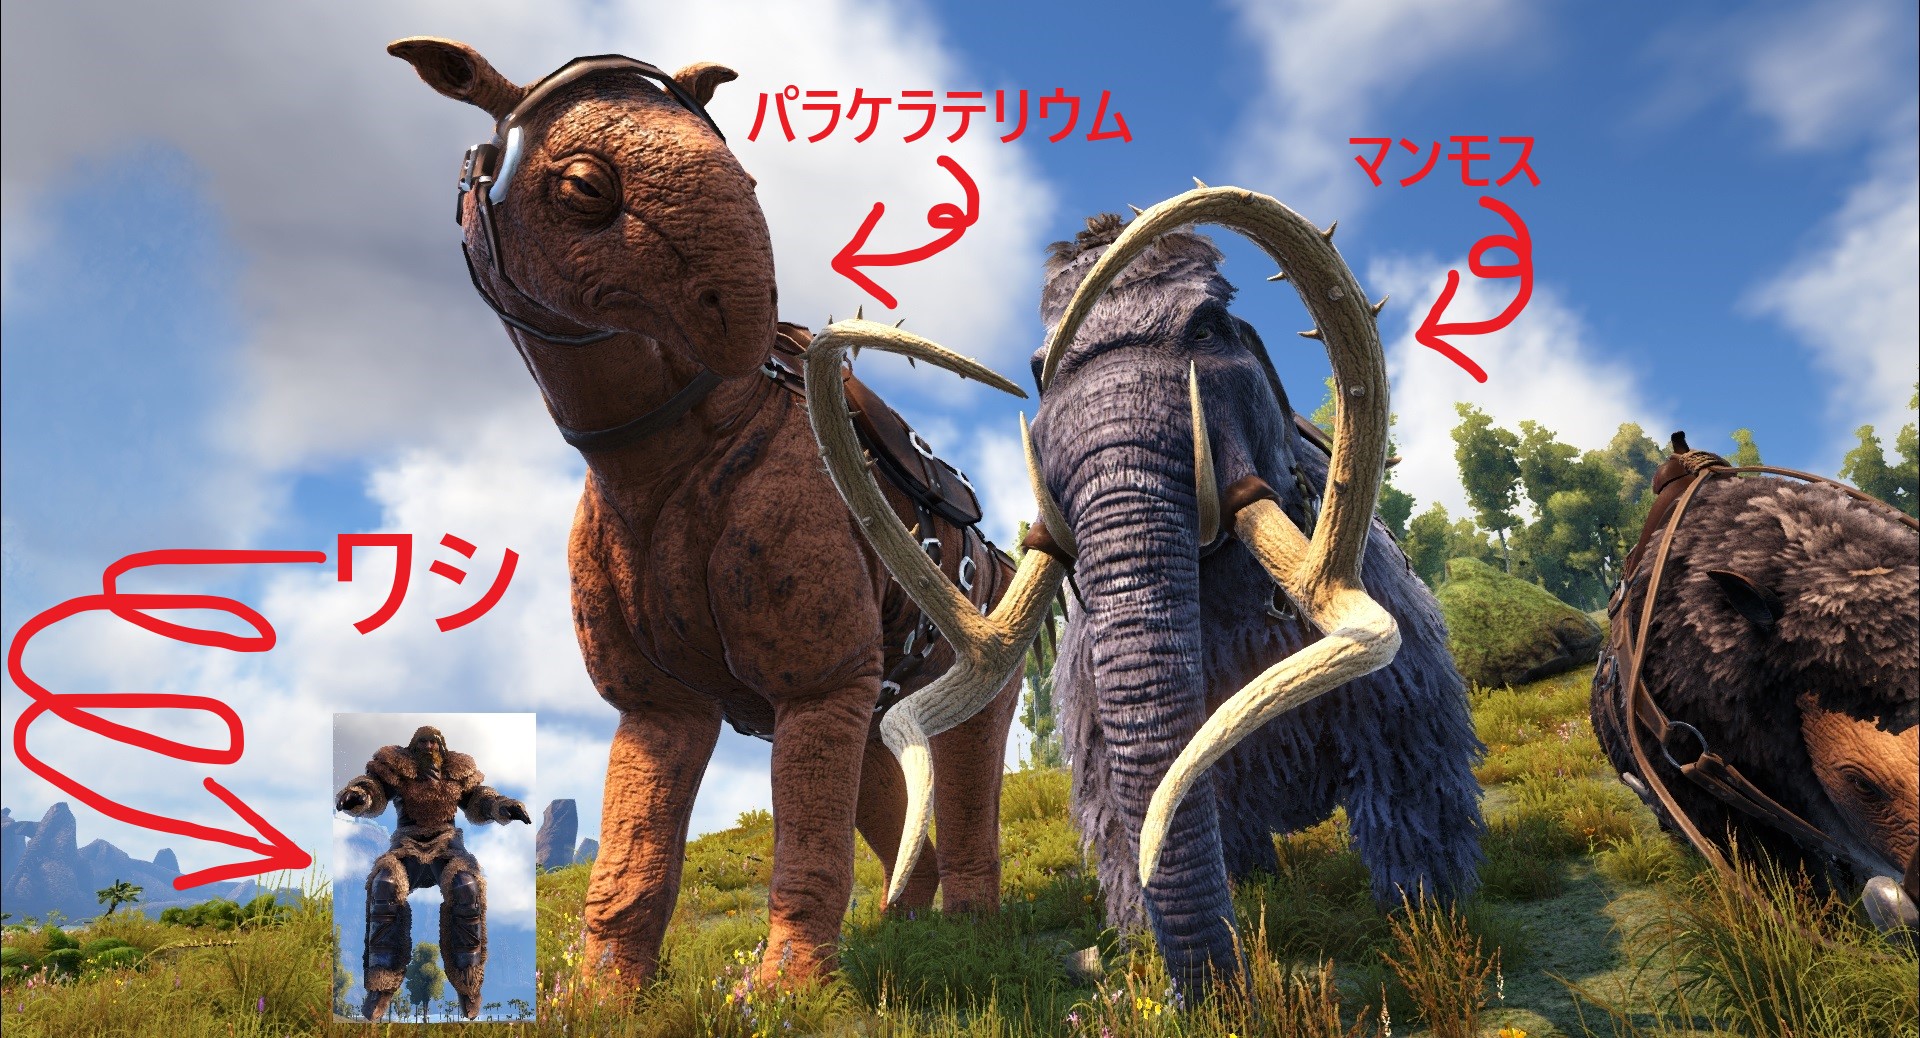 Ark Survival Evolved フレンズ紹介 草食哺乳類編 娯楽道楽まとめ大陸